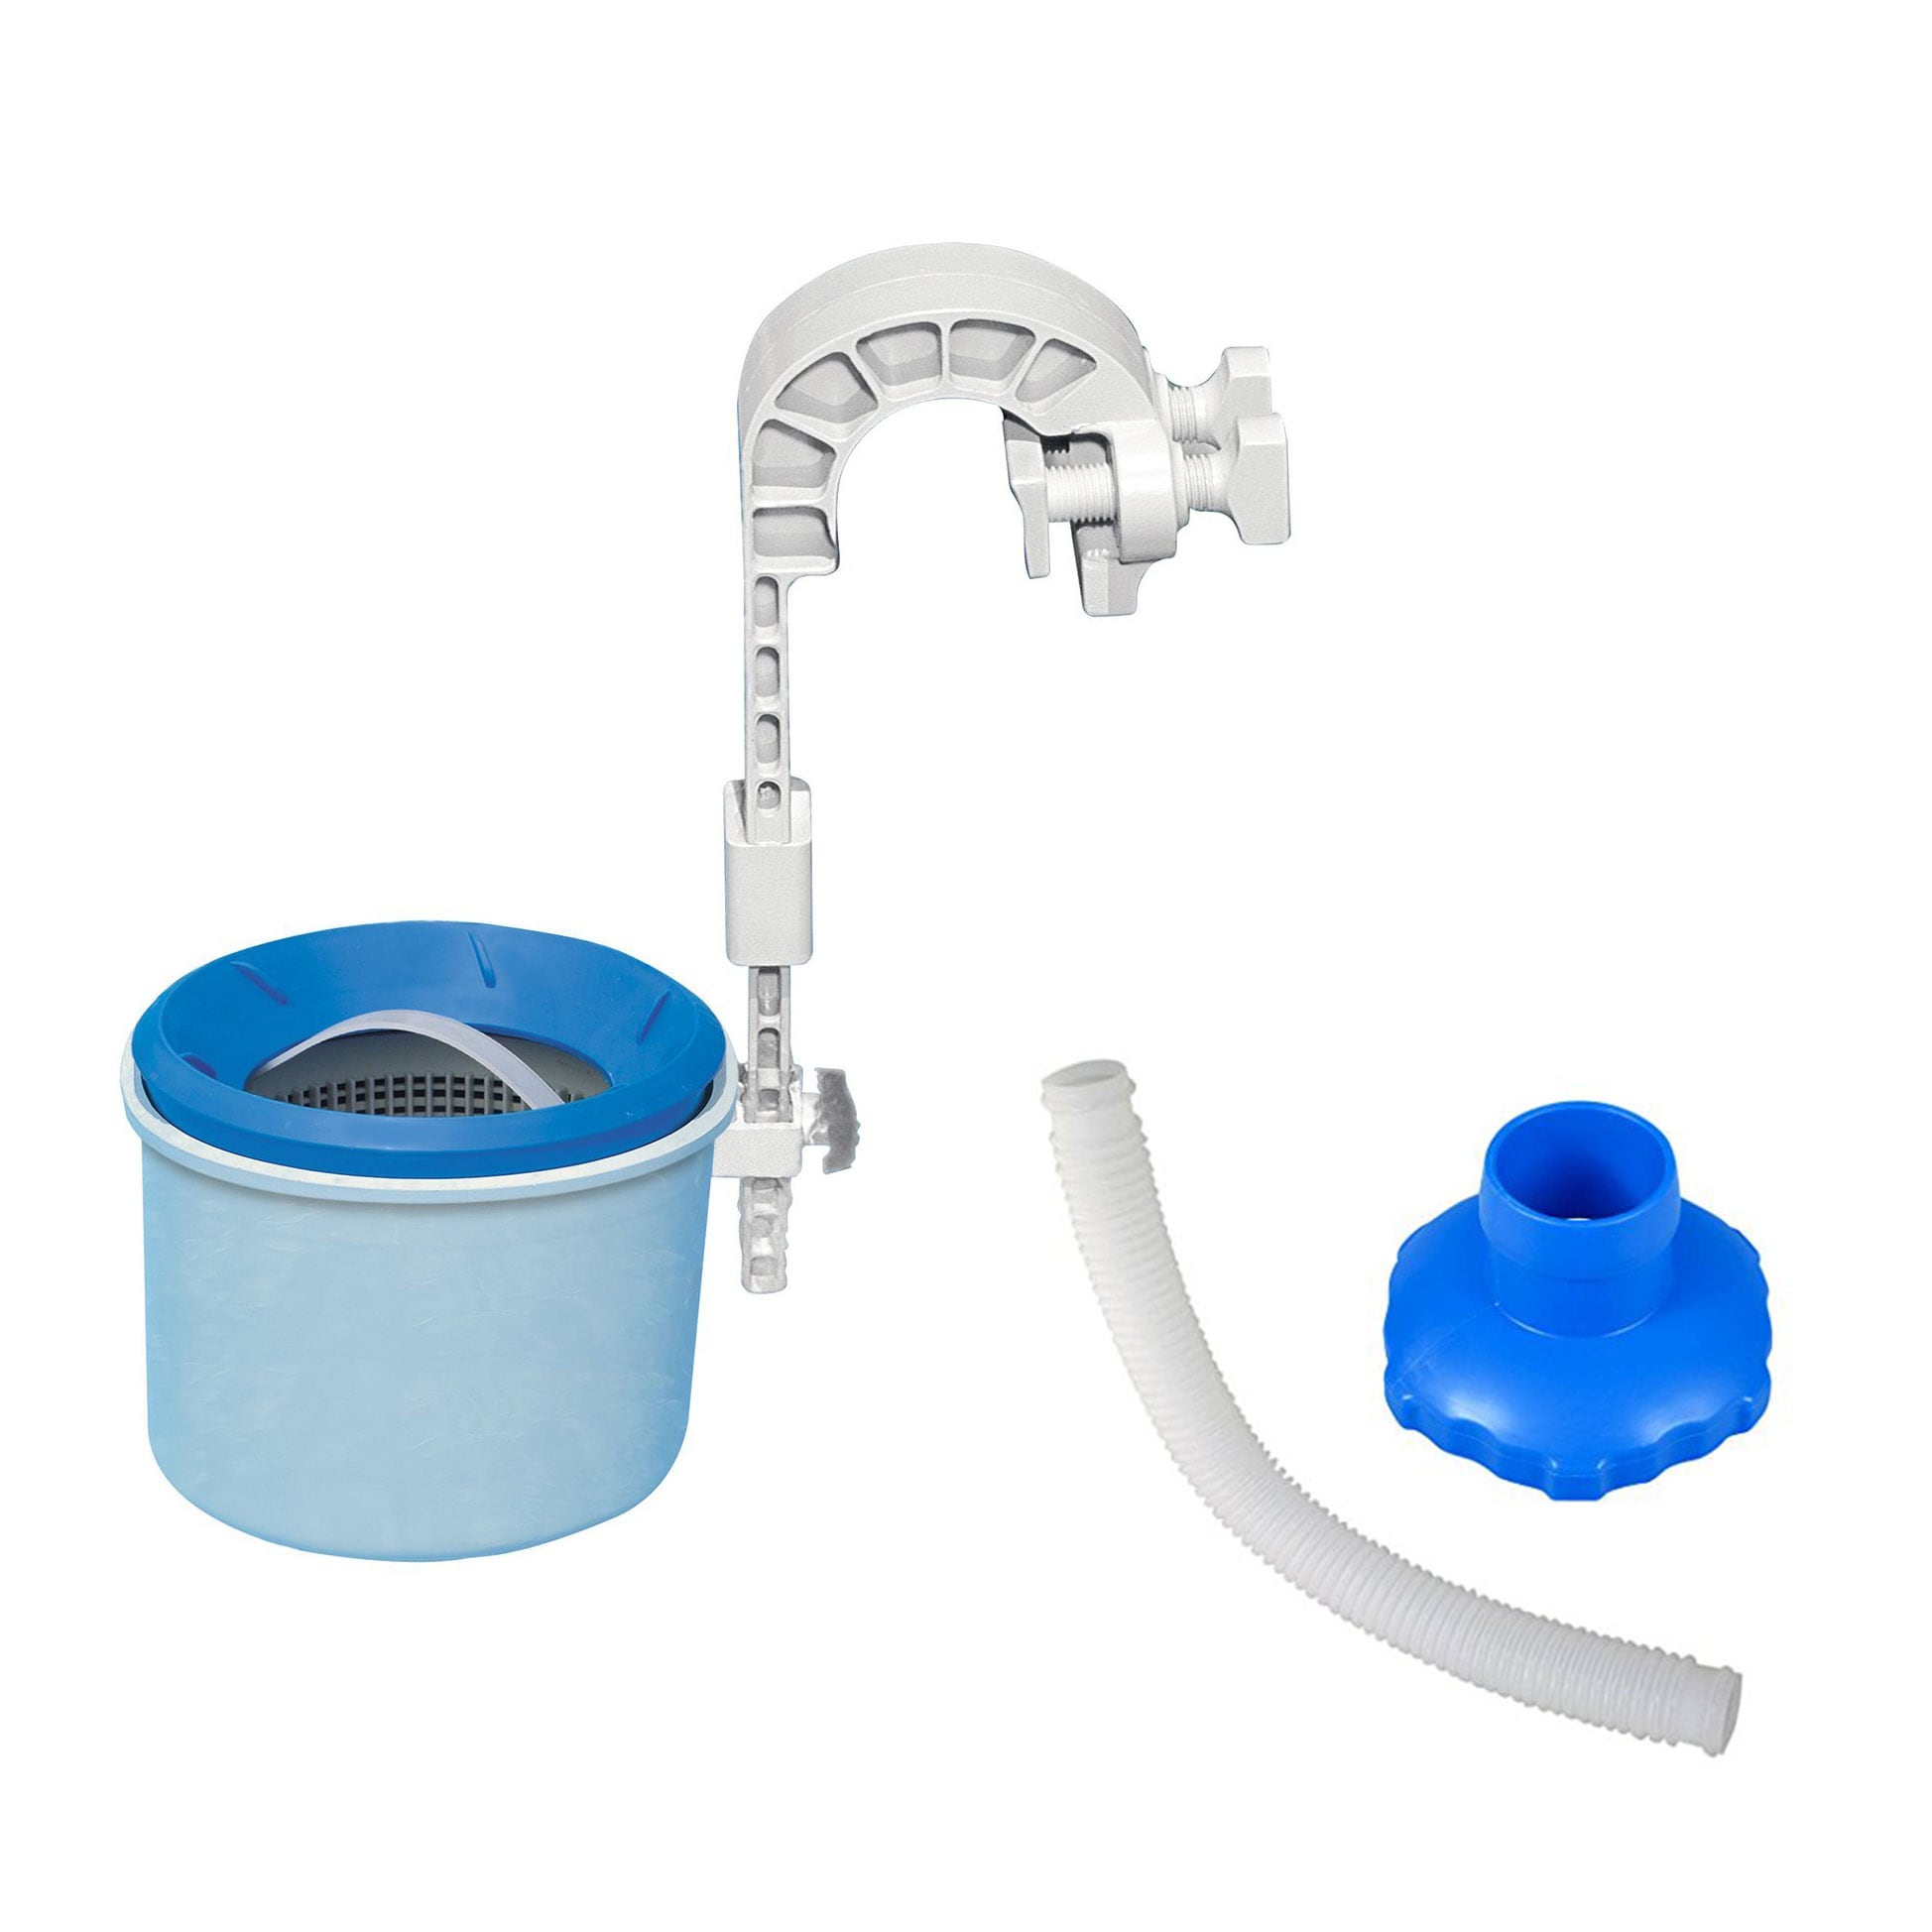 Mount with Skimmer Intex department and for Systems Parts Wall Pools Pool Auto in Above-Ground the at Deluxe Hose Adapter Skimmer Replacement B